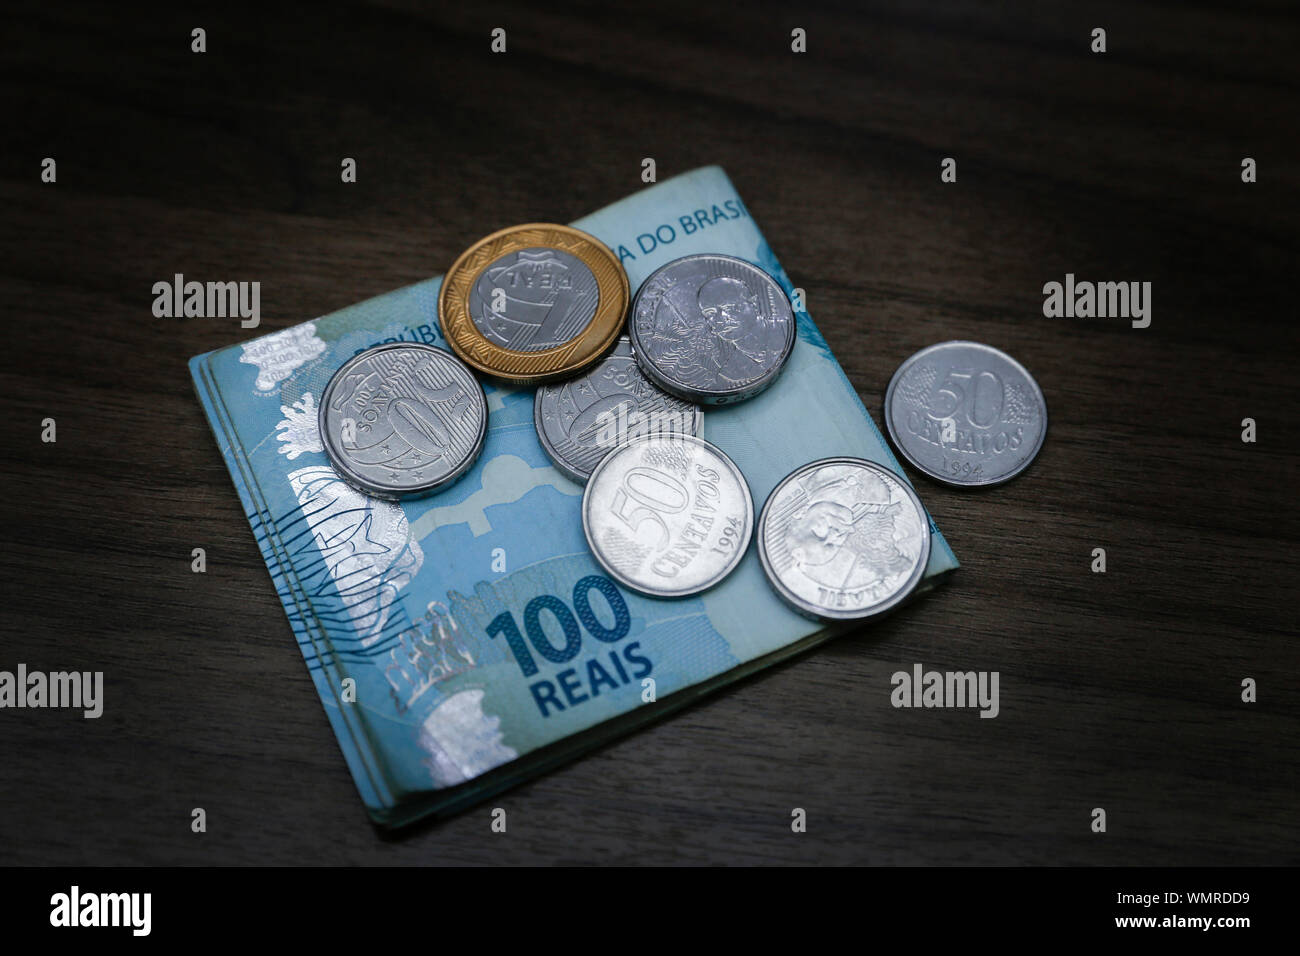 Money from Brazil, notes of Real, Brazil BRL banknote, Brazilian currency, economy and business. Stock Photo